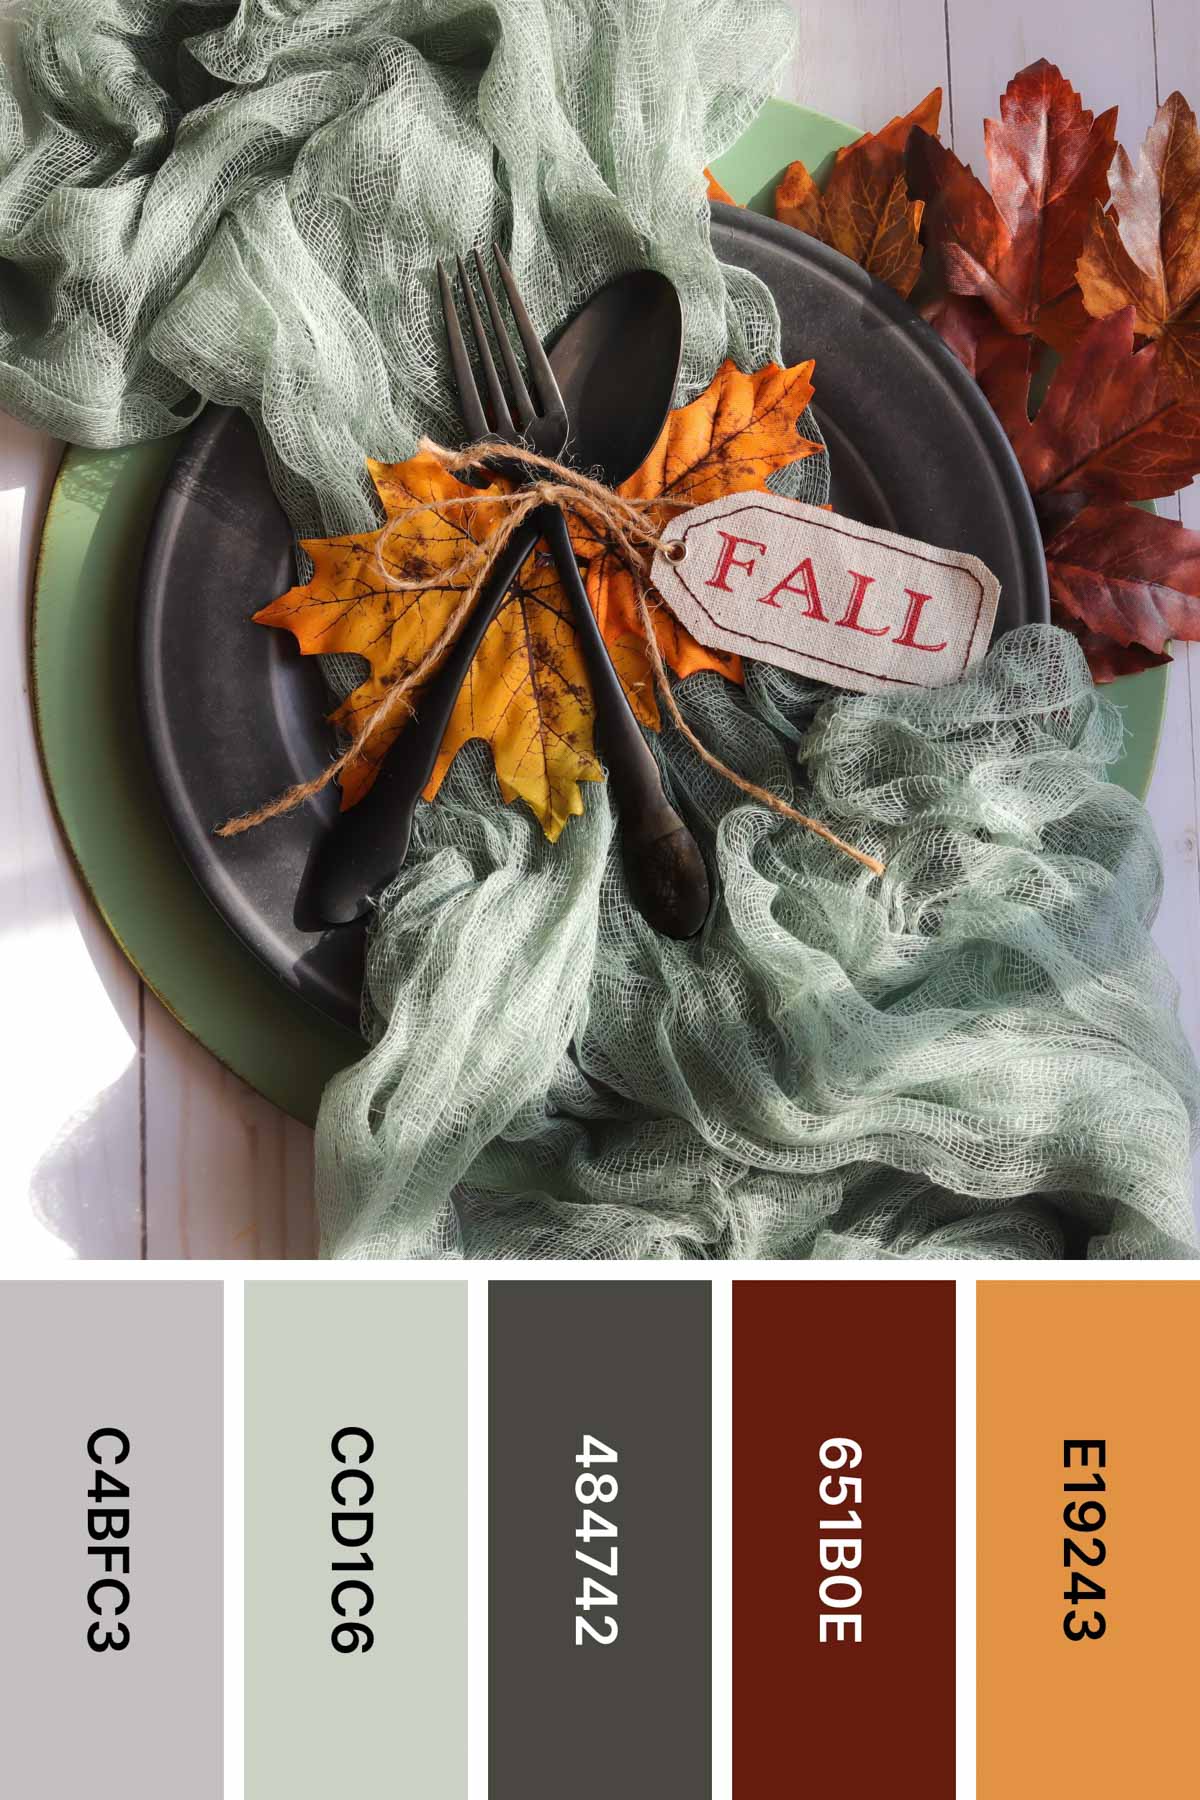 charger with silverware and a fall sign with a fall color palette 